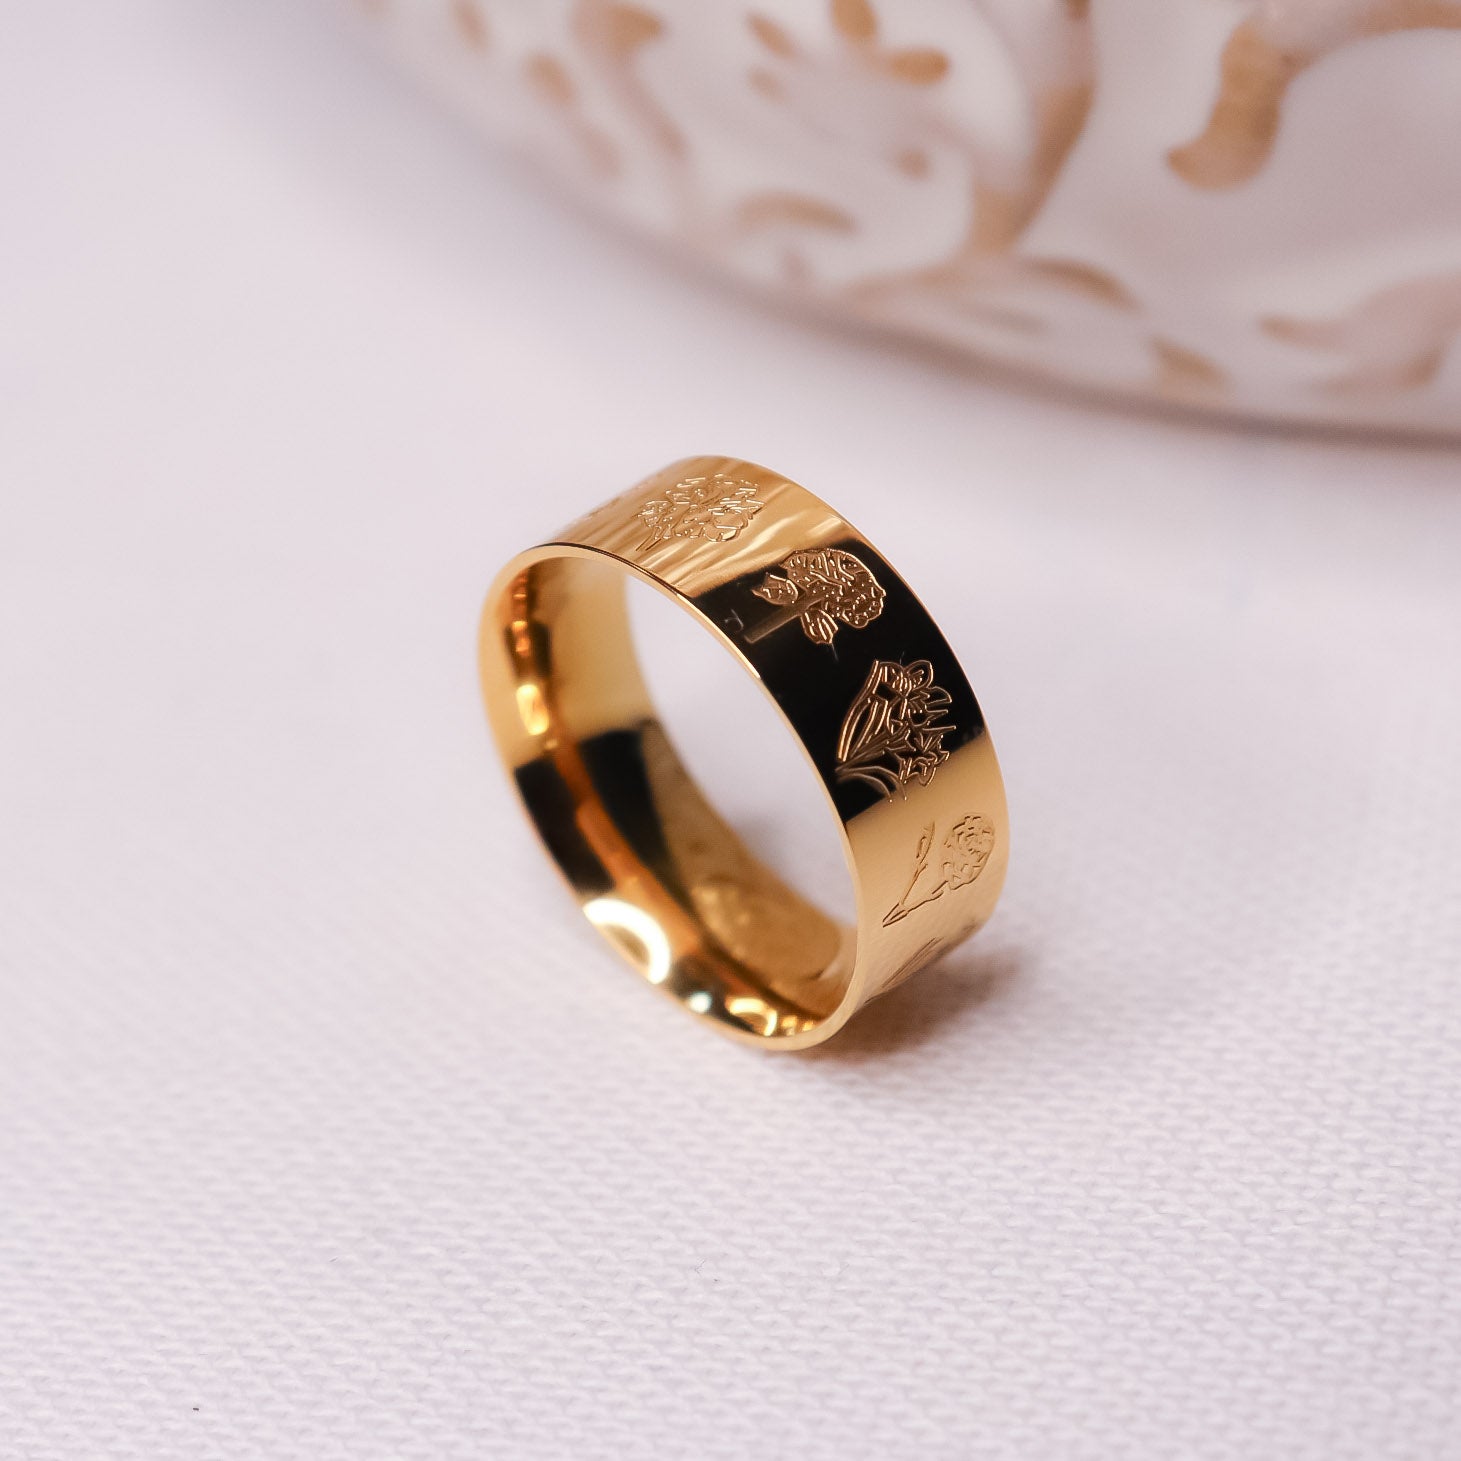 Birth Flowers Ring - Fierce Creative Co. Birth Flowers Ring - Fierce Creative Co. - Waterproof Jewelry - Gold Band with flowers engraved representing various birth flowers 